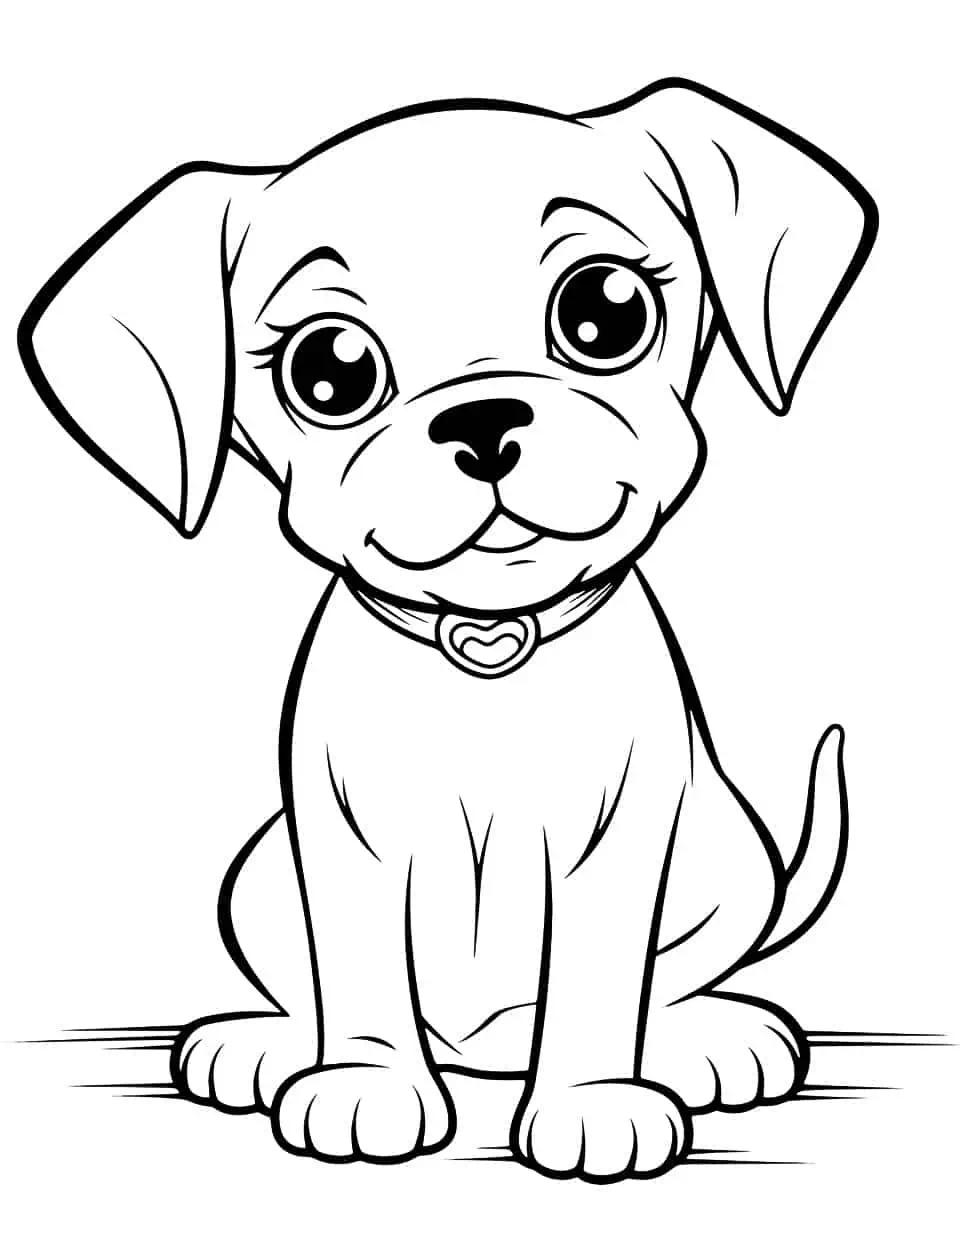 Kawaii Boxer Puppy Dog Coloring Page - A Boxer puppy styled in a cute, kawaii theme with big, adorable eyes.